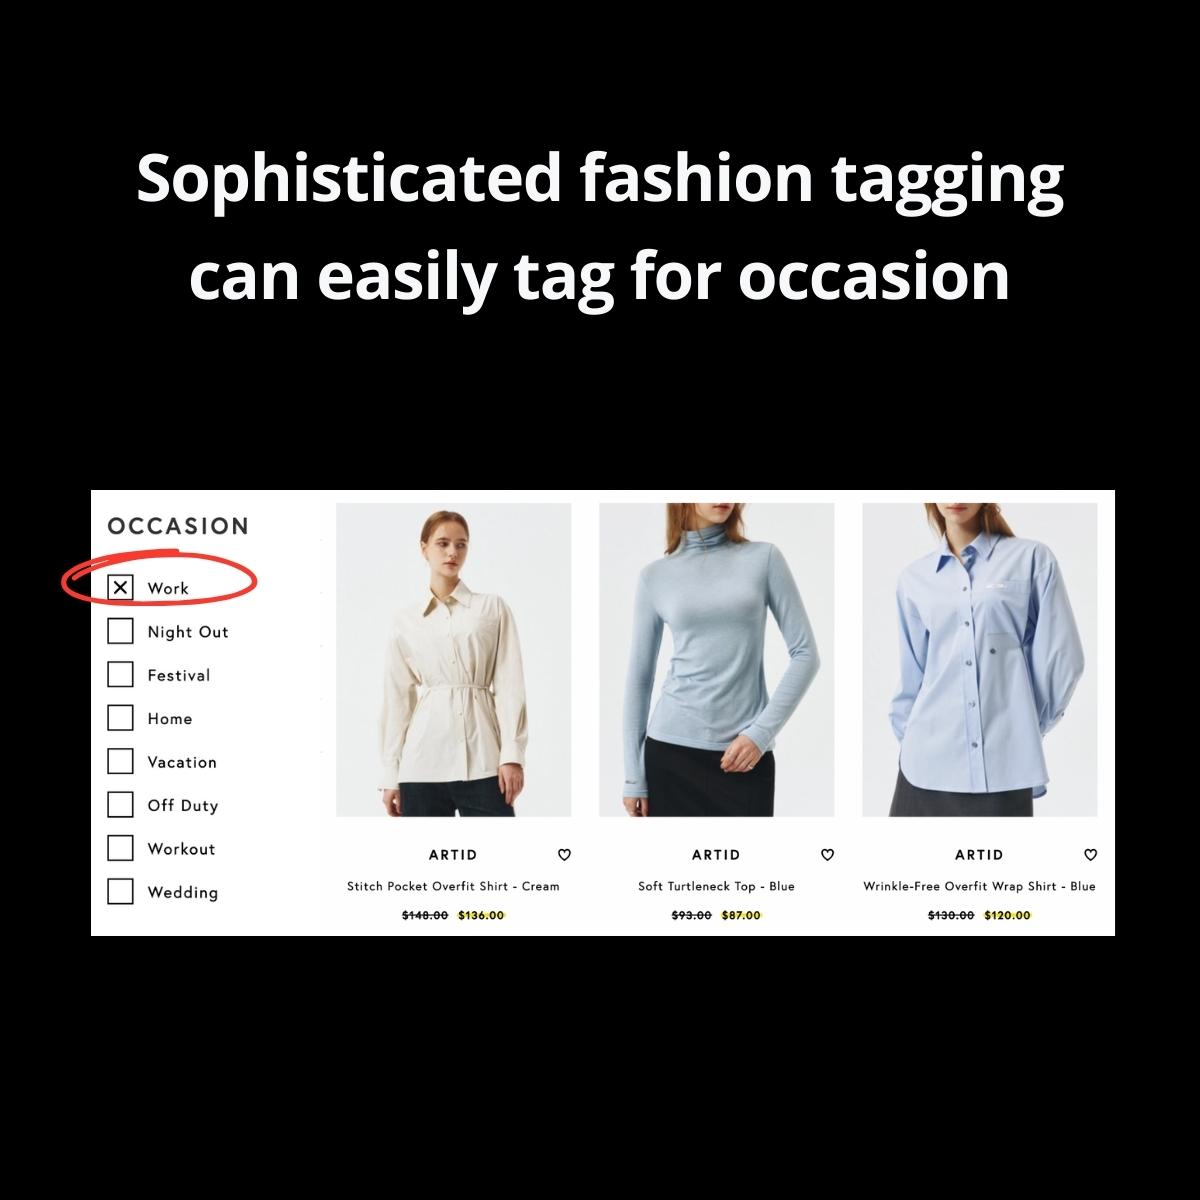 Sophisticated fashion tagging can create tags for occasion or vibe